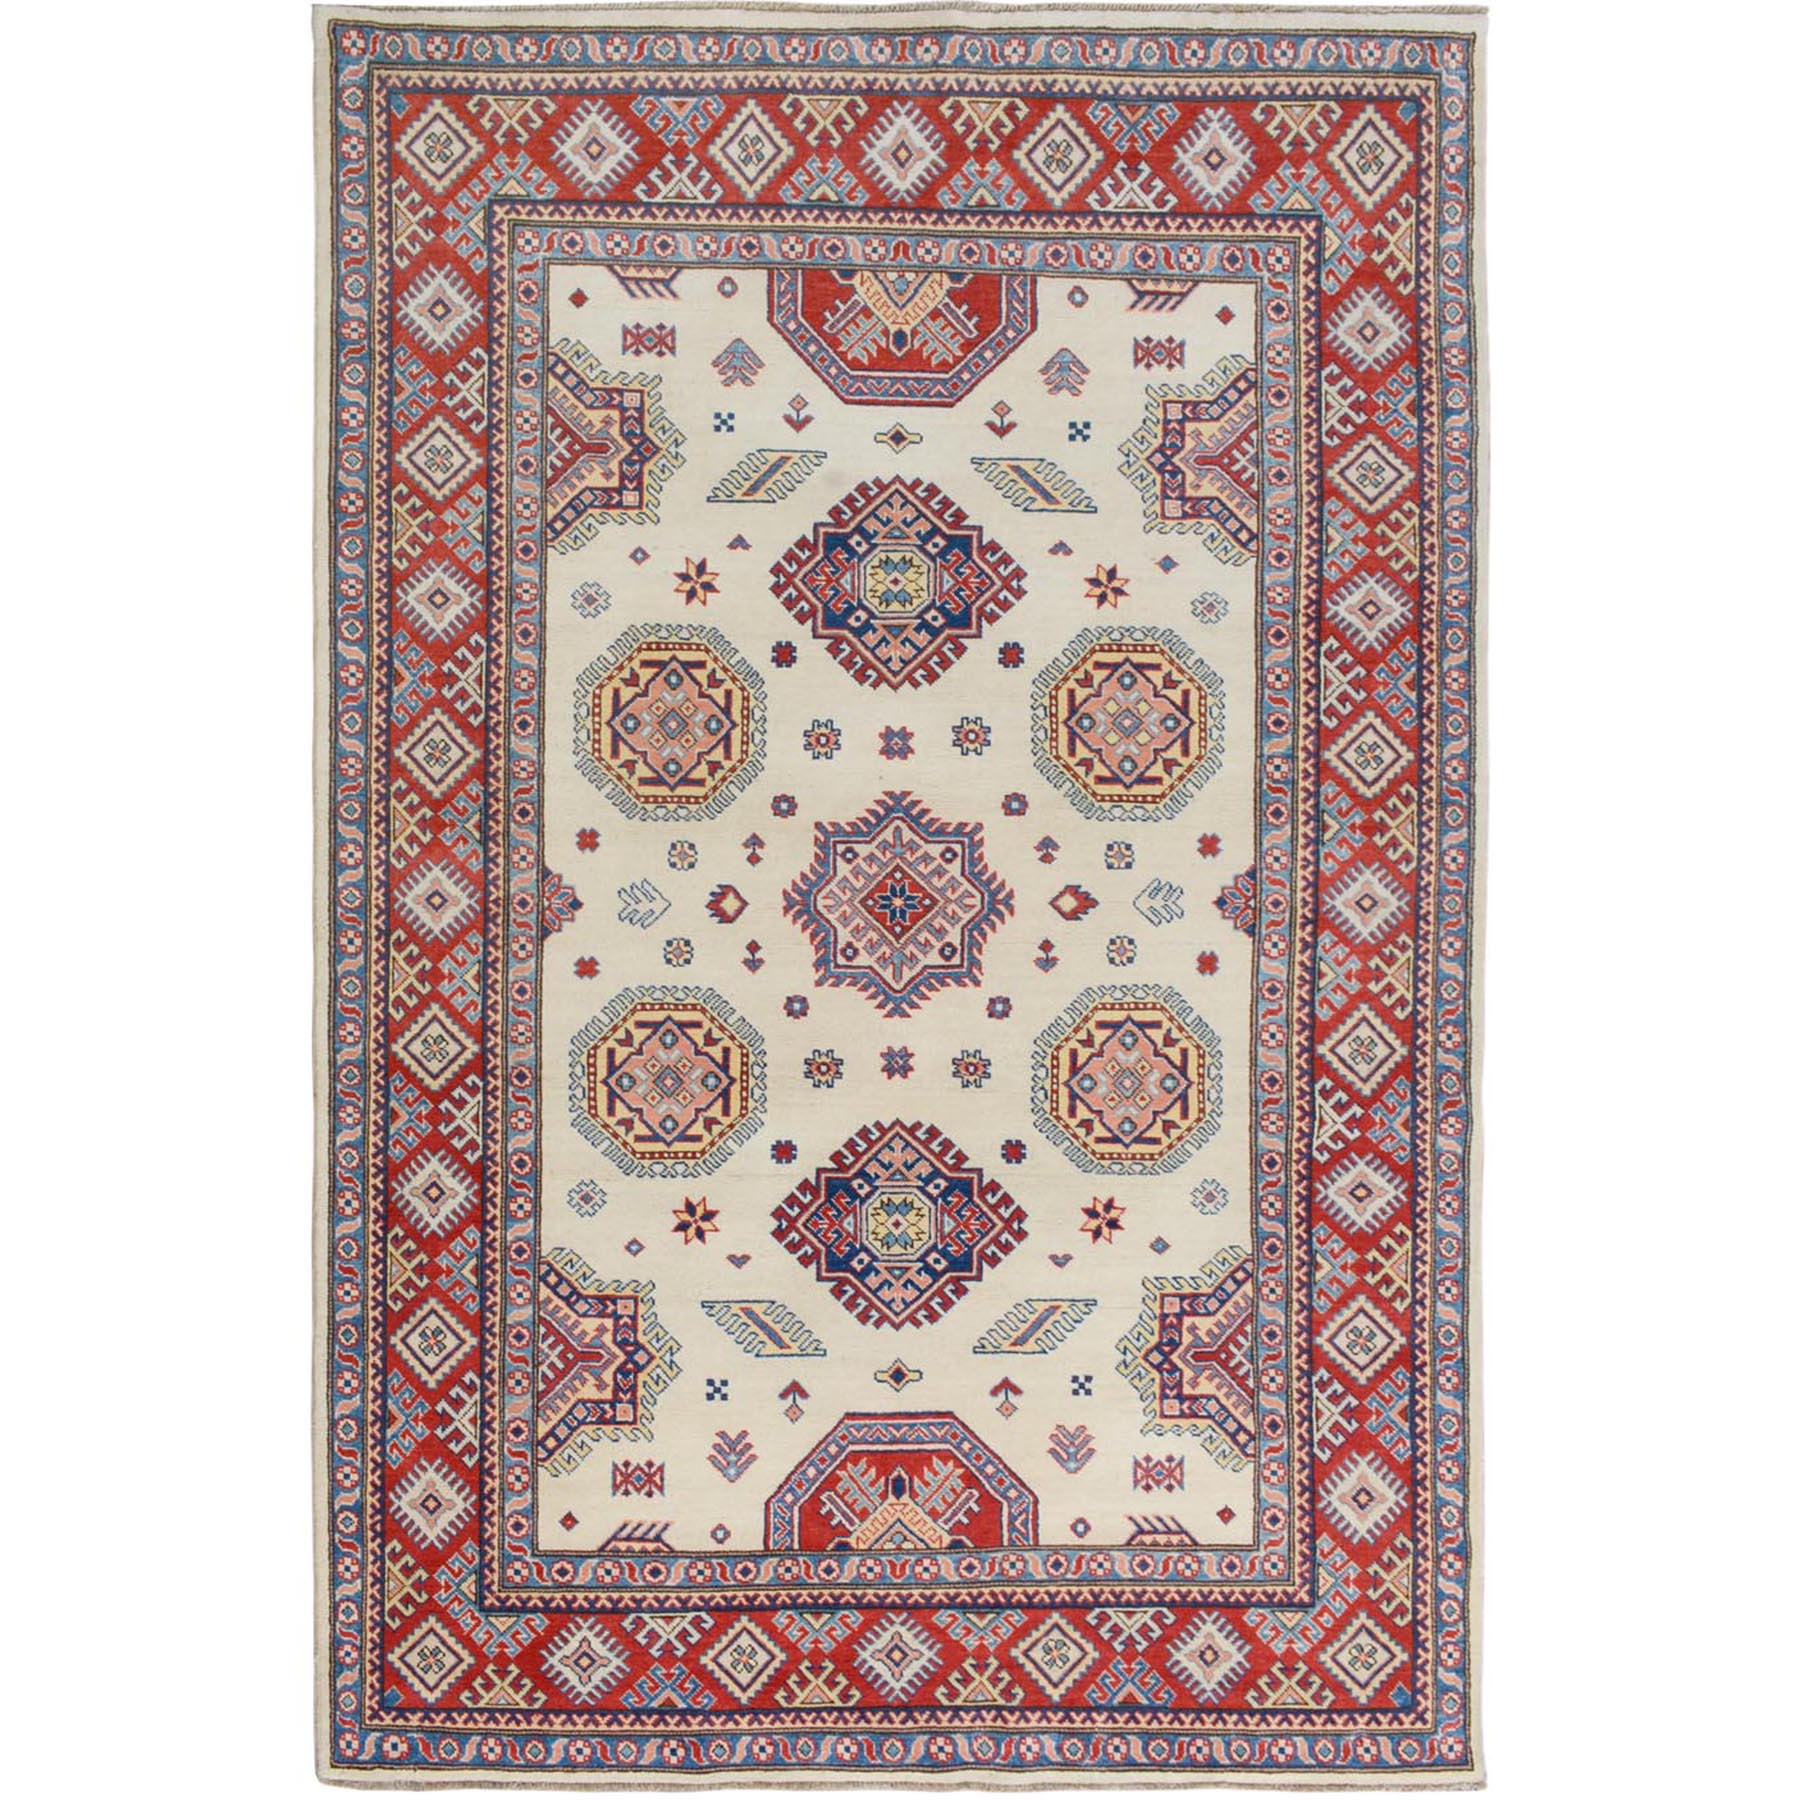 6'X9' Ivory Special Kazak Geometric Design Pure Wool Hand Knotted Oriental Rug moae709b